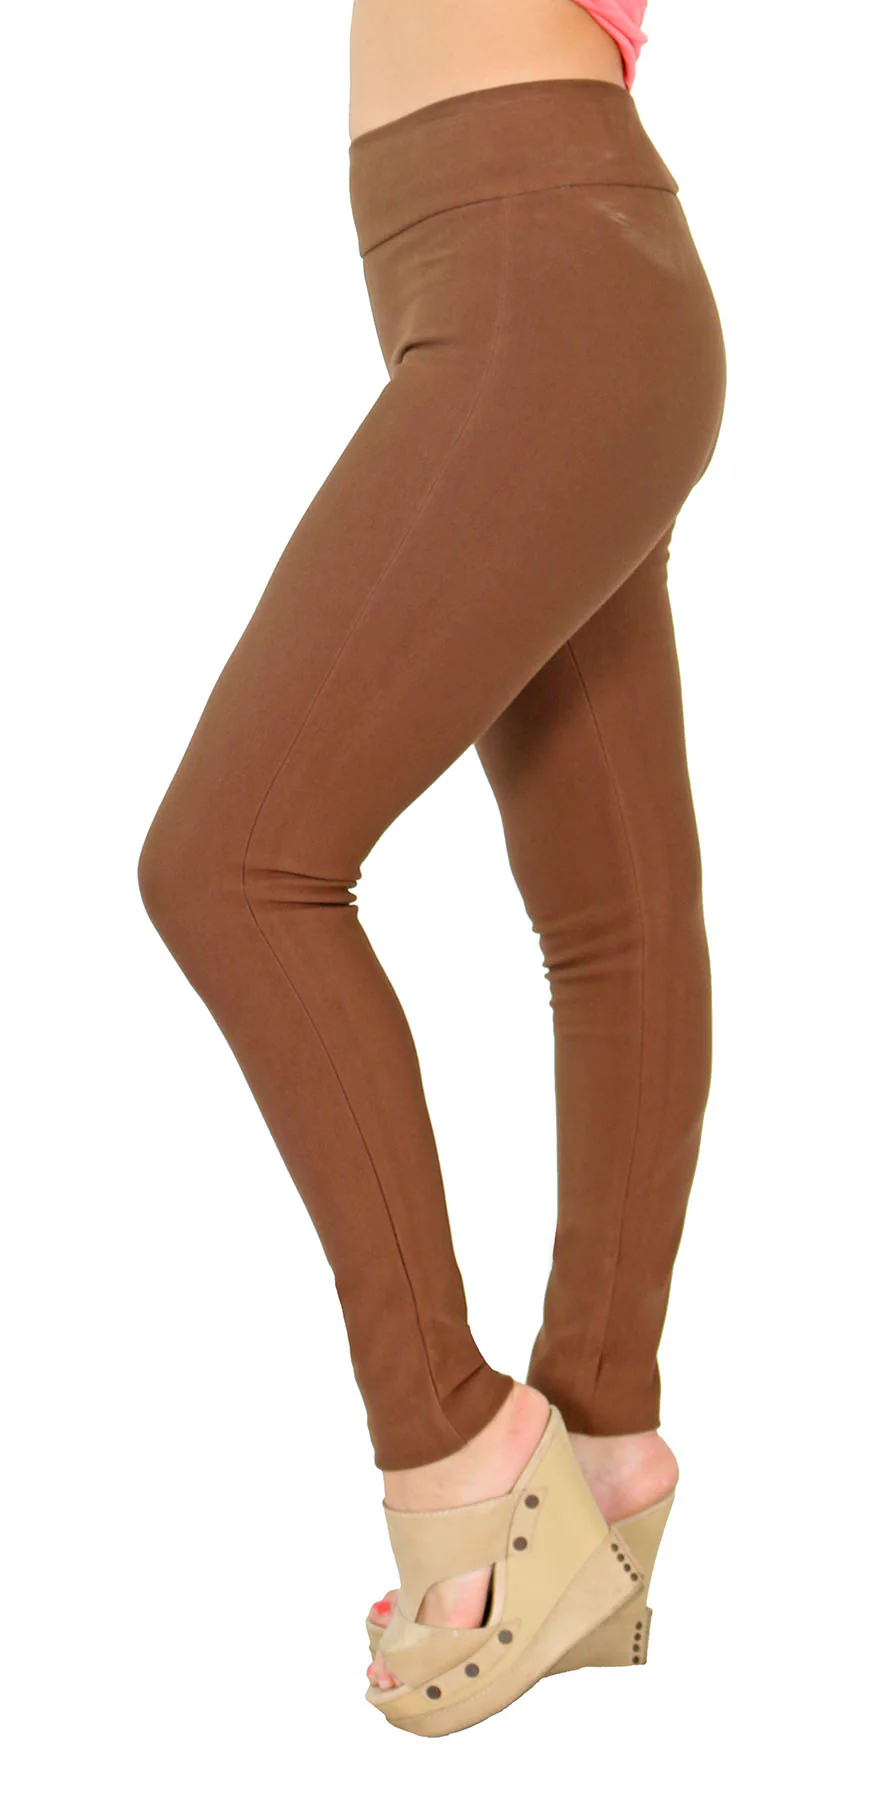 Brown leggings for women are versatile wardrobe staples that offer endless possibilities for creating stylish and comfortable outfits.